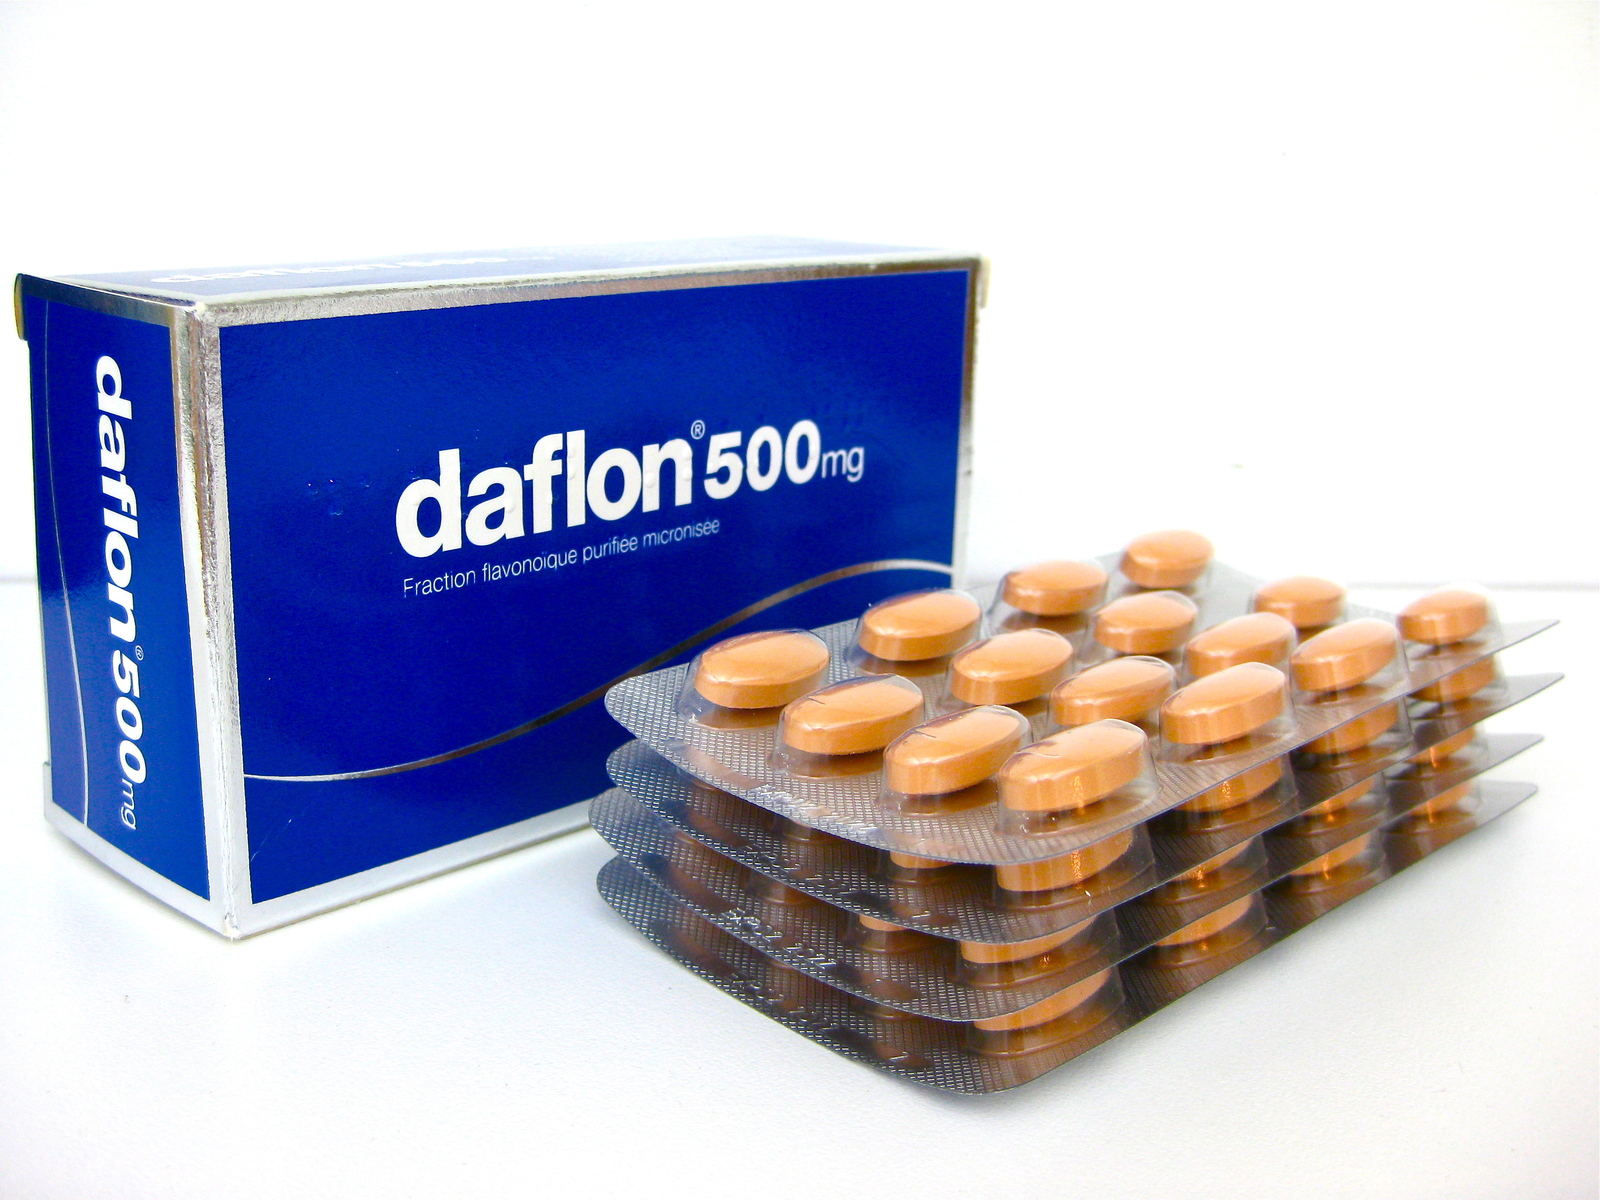 Daflon 500 mg is an oral drug indicated in the treatment of venous disease